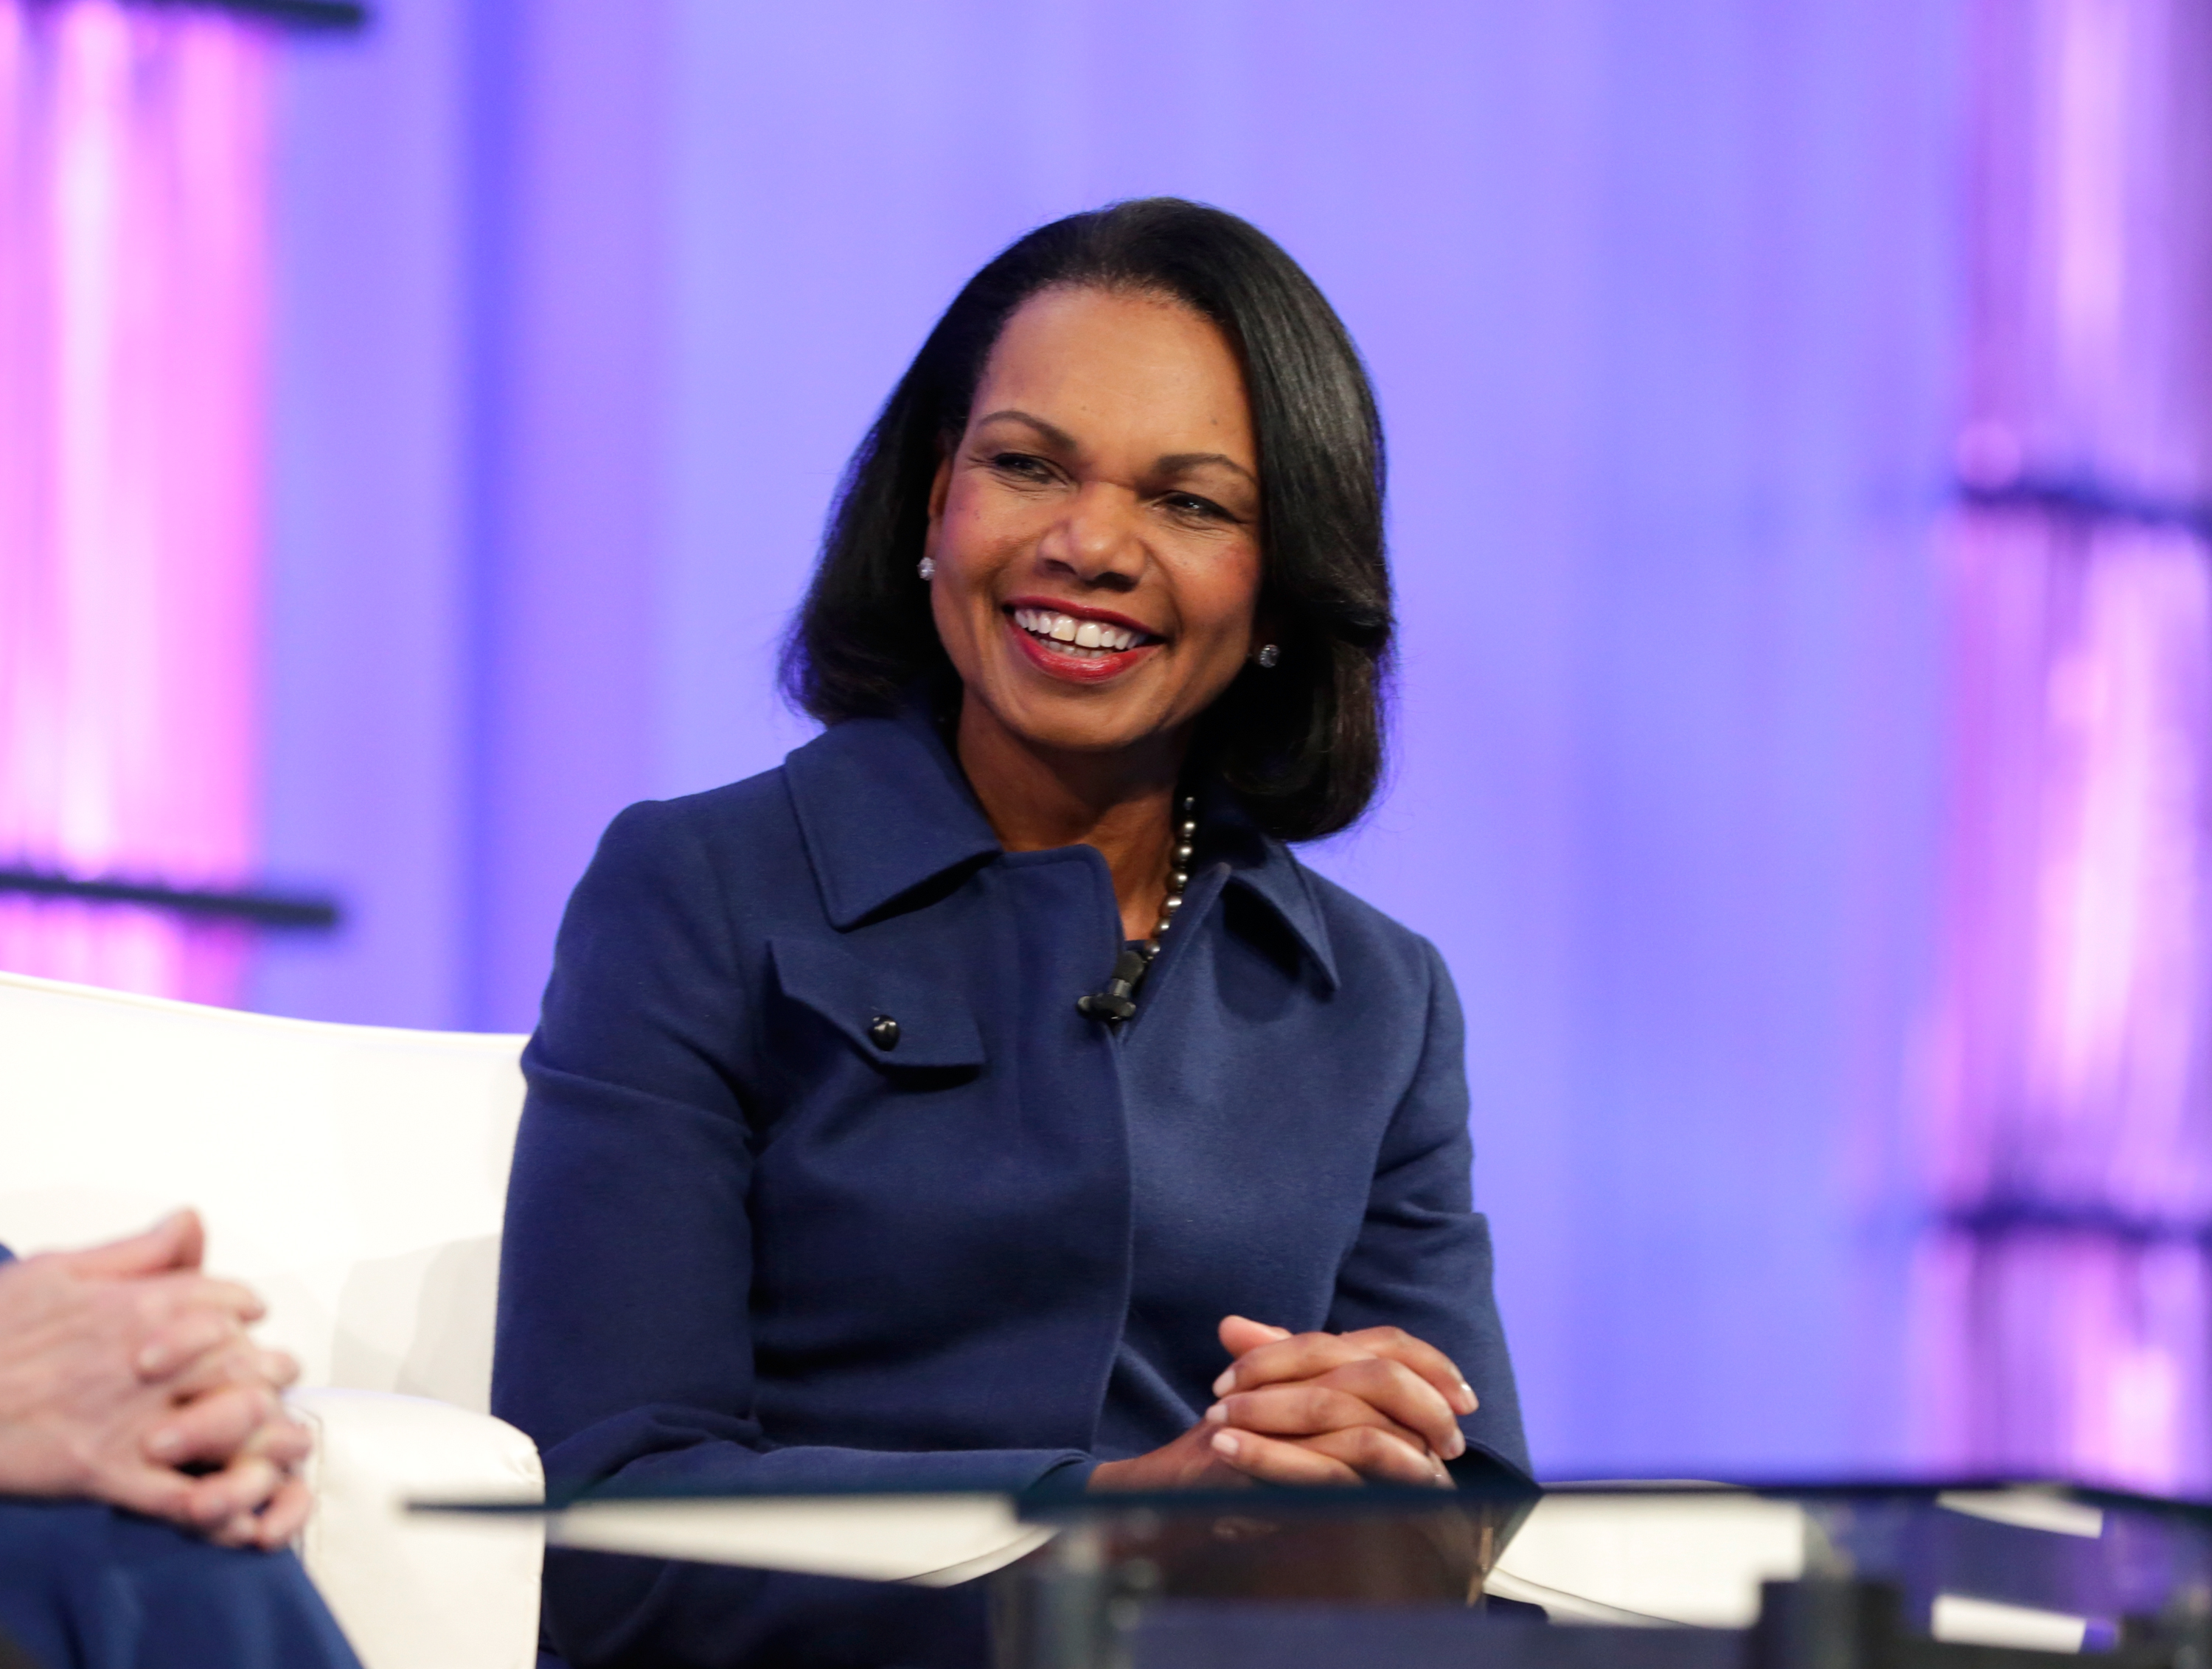 SAN JOSE, CA - FEBRUARY 01:  Former United States Secretary of State Condoleezza Rice speaks at the Watermark Conference for Women at San Jose Convention Center on February 1, 2017 in San Jose, California.  (Photo by Marla Aufmuth/Getty Images for Watermark Conference for Women  ) (Marla Aufmuth—Getty Images for Watermark Conference for Women)